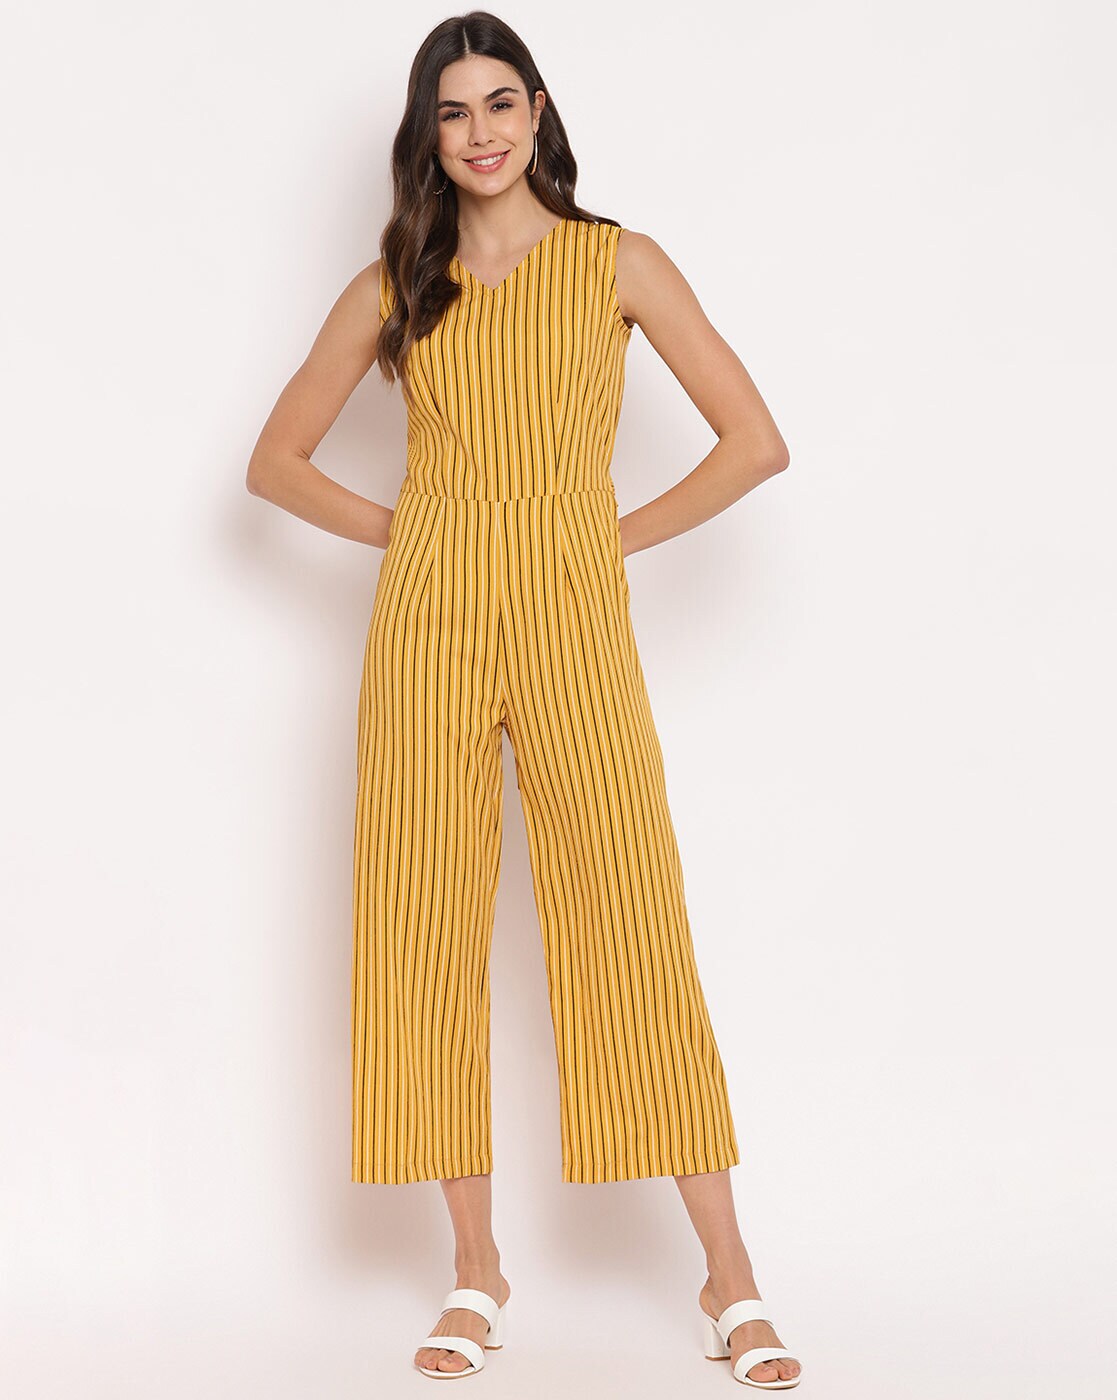 Honey by Pantaloons Green & White Striped Basic Jumpsuit Price in India,  Full Specifications & Offers | DTashion.com